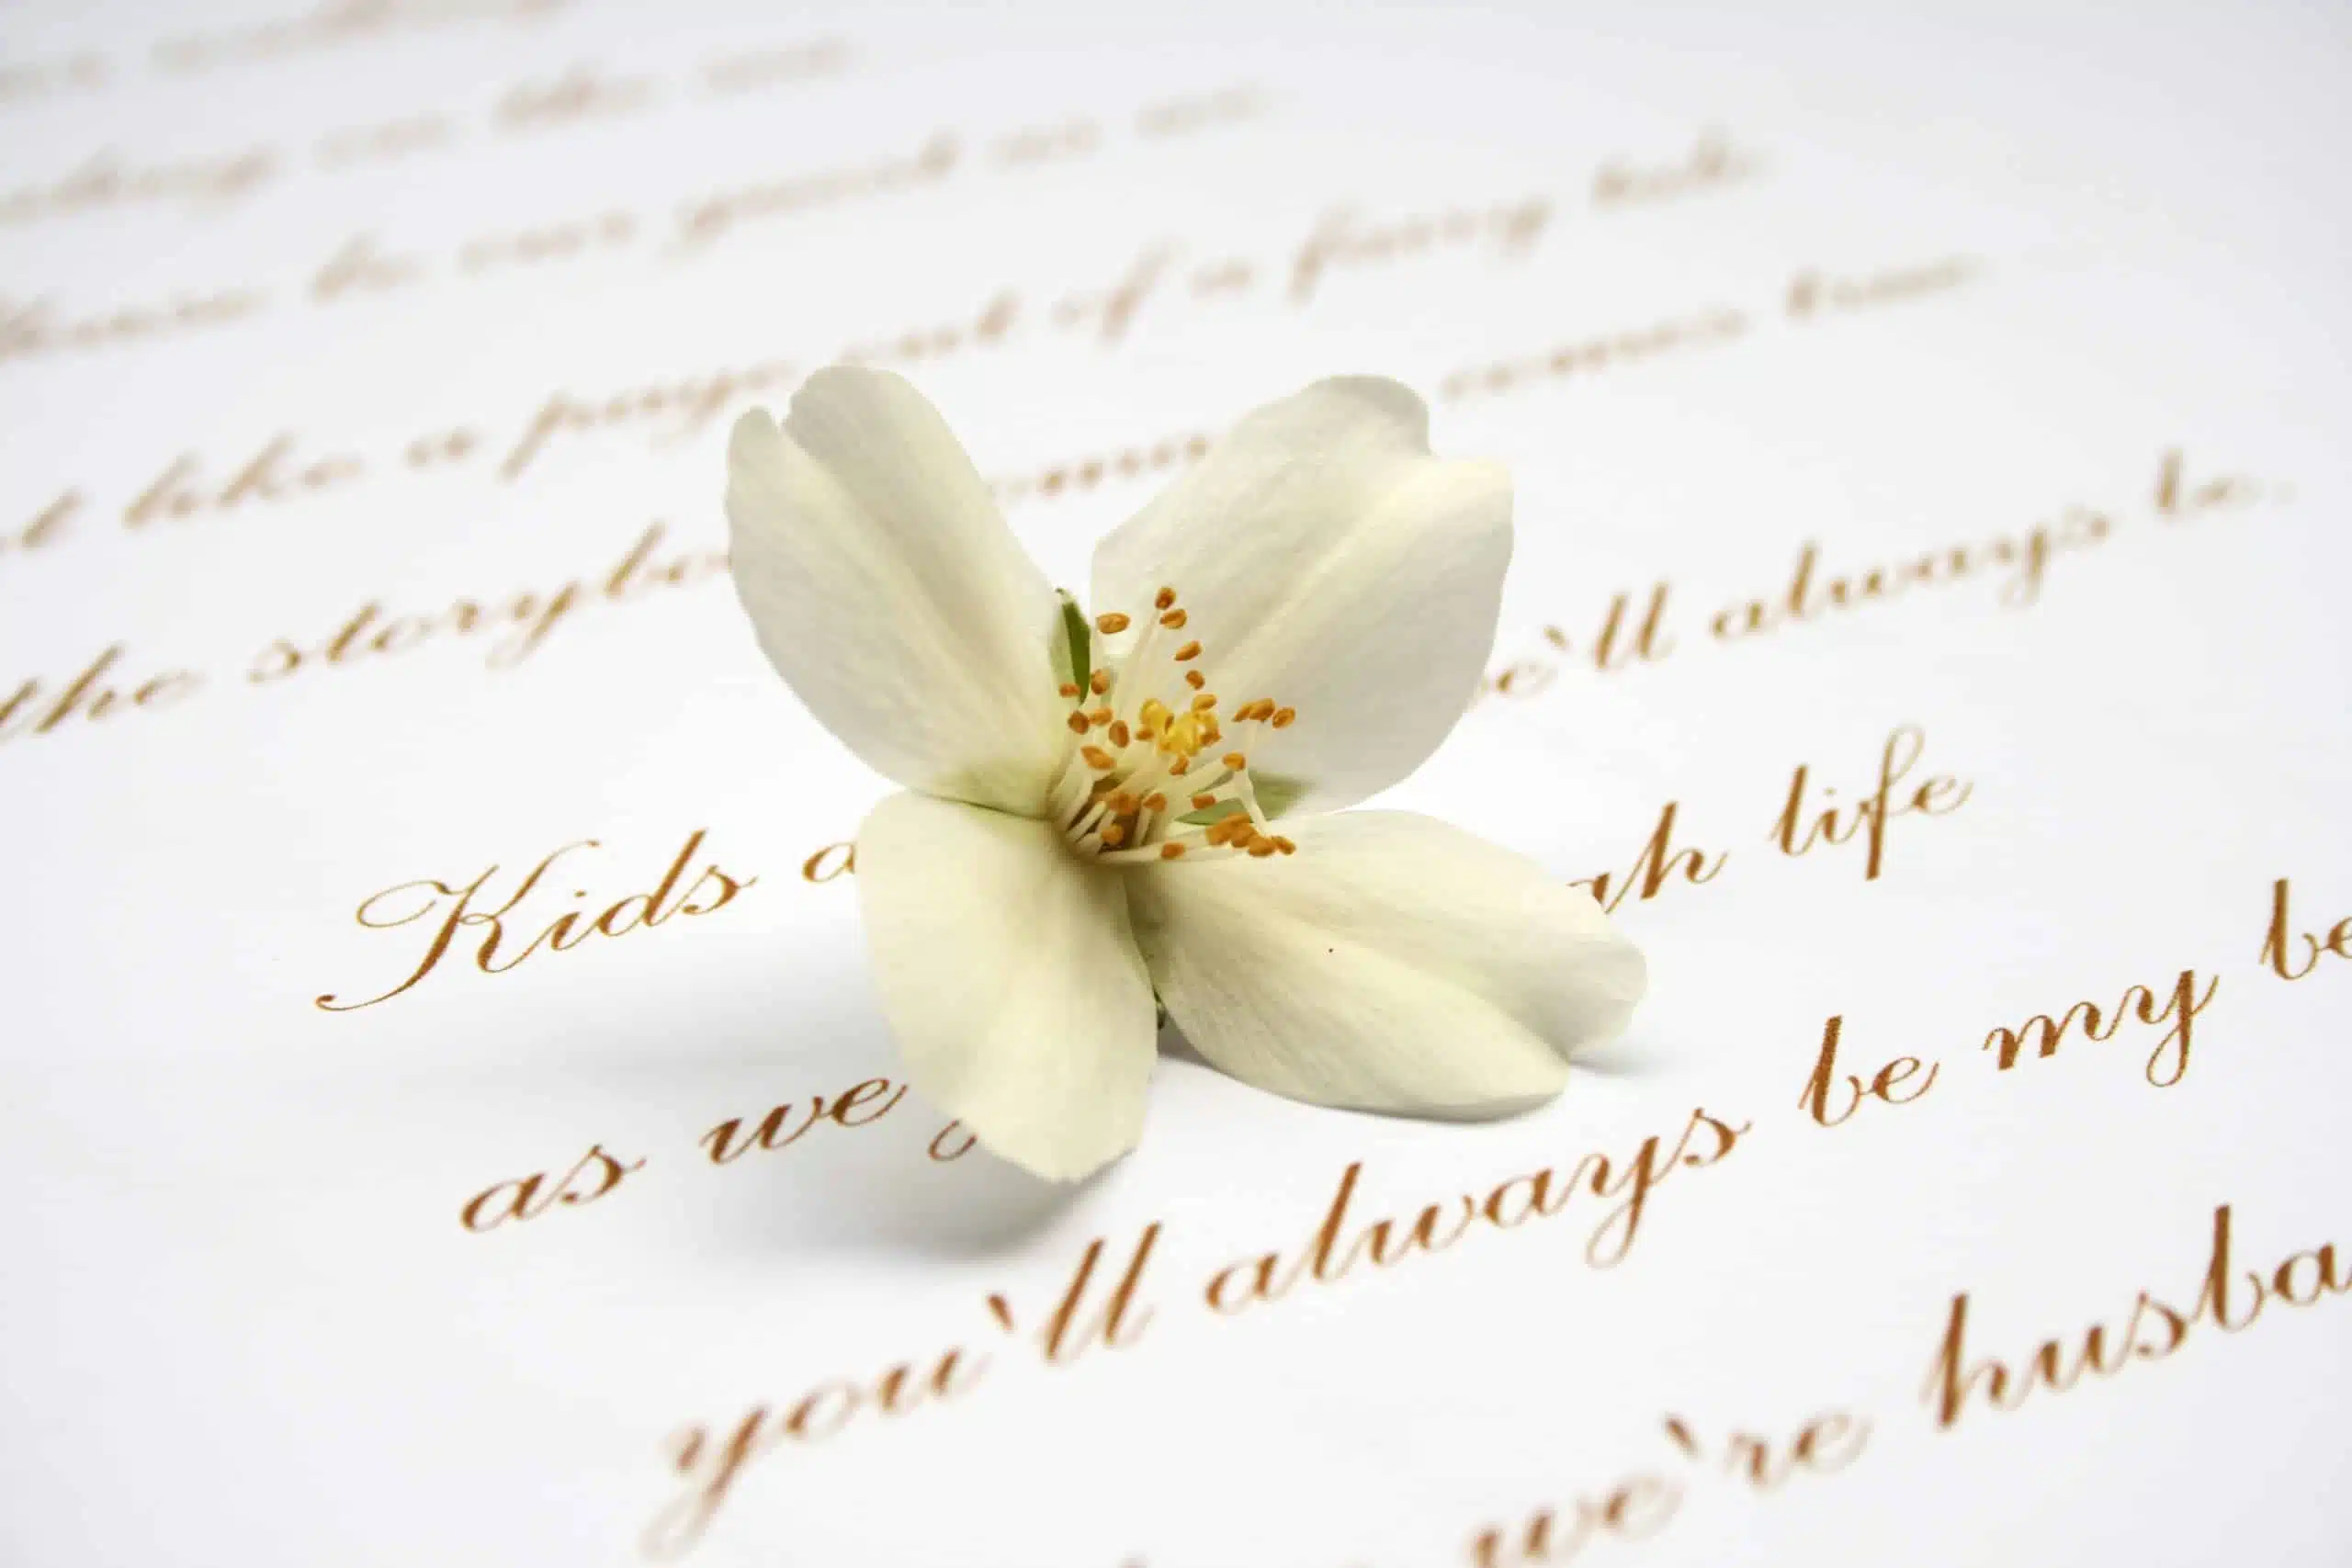 little white blossom sitting on top of paper with poem.